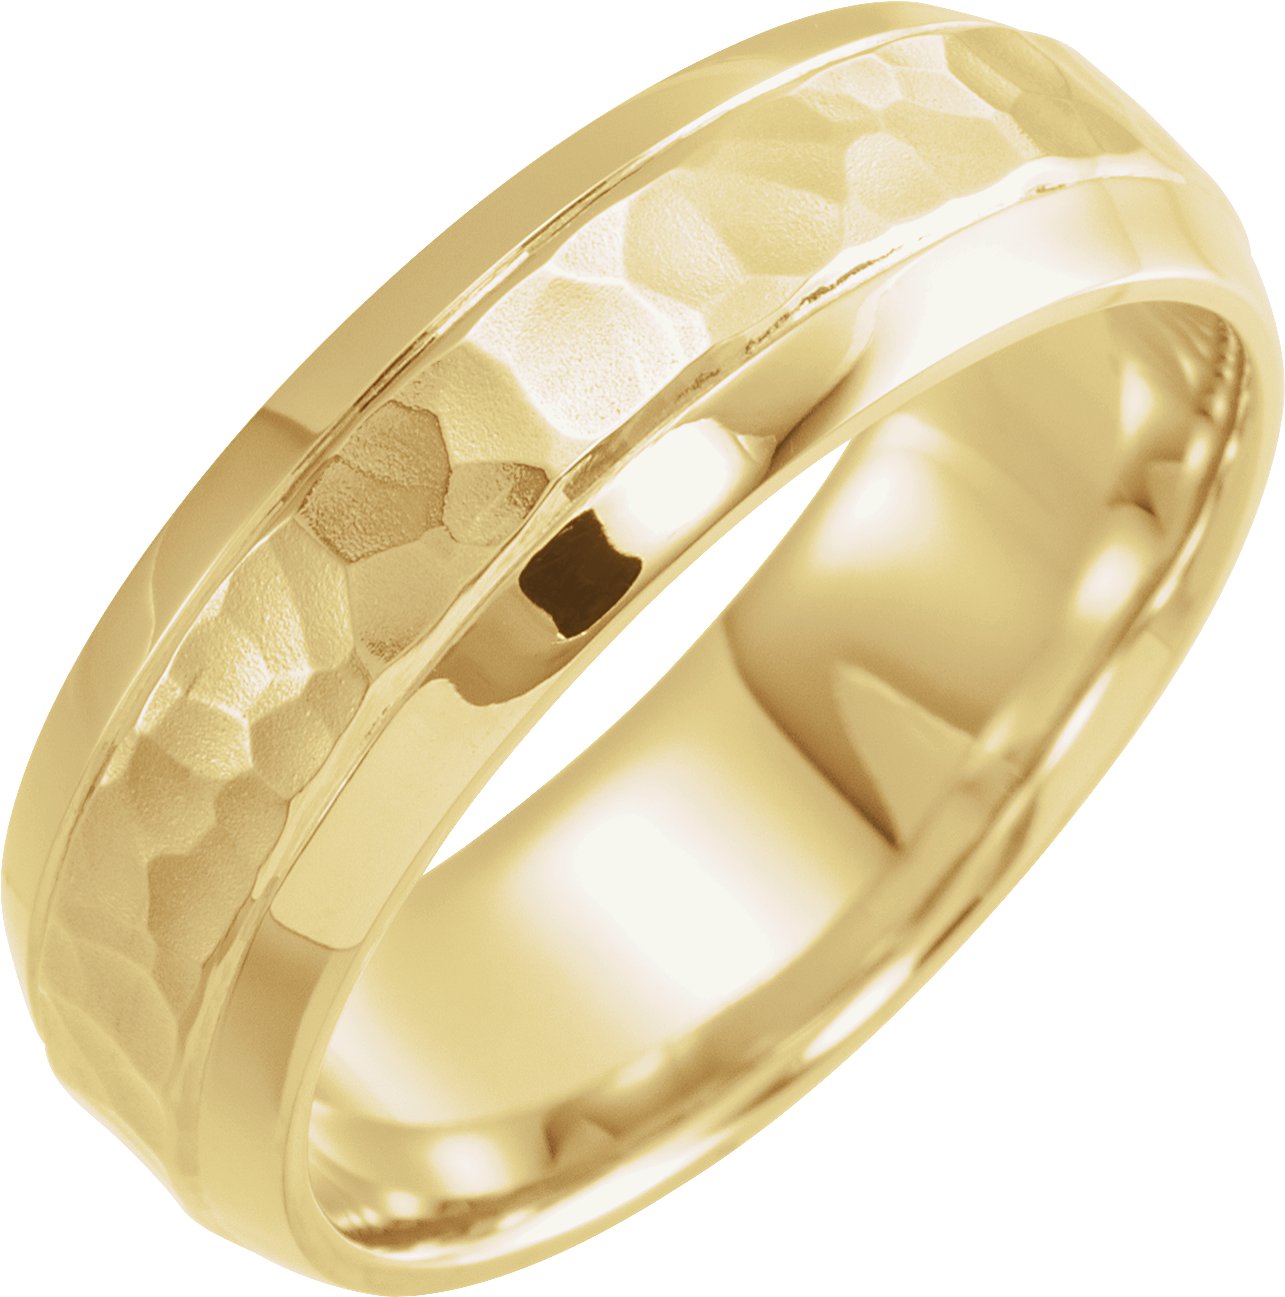 14K Yellow 7 mm Beveled-Edge Band with Hammered Texture Size 10.5